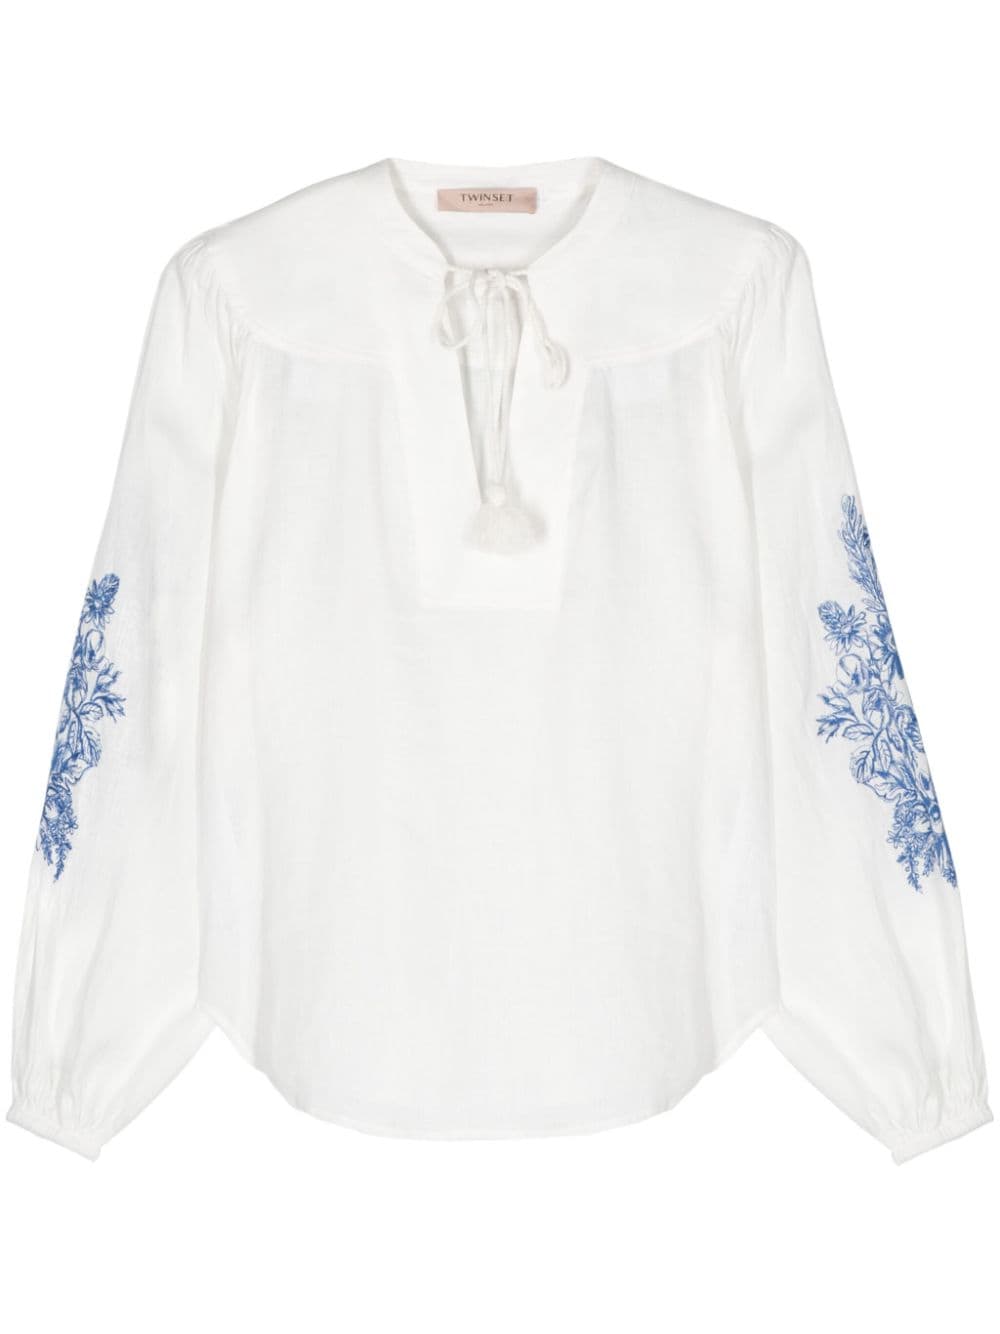 TWINSET floral-embroidery chambray blouse - White von TWINSET